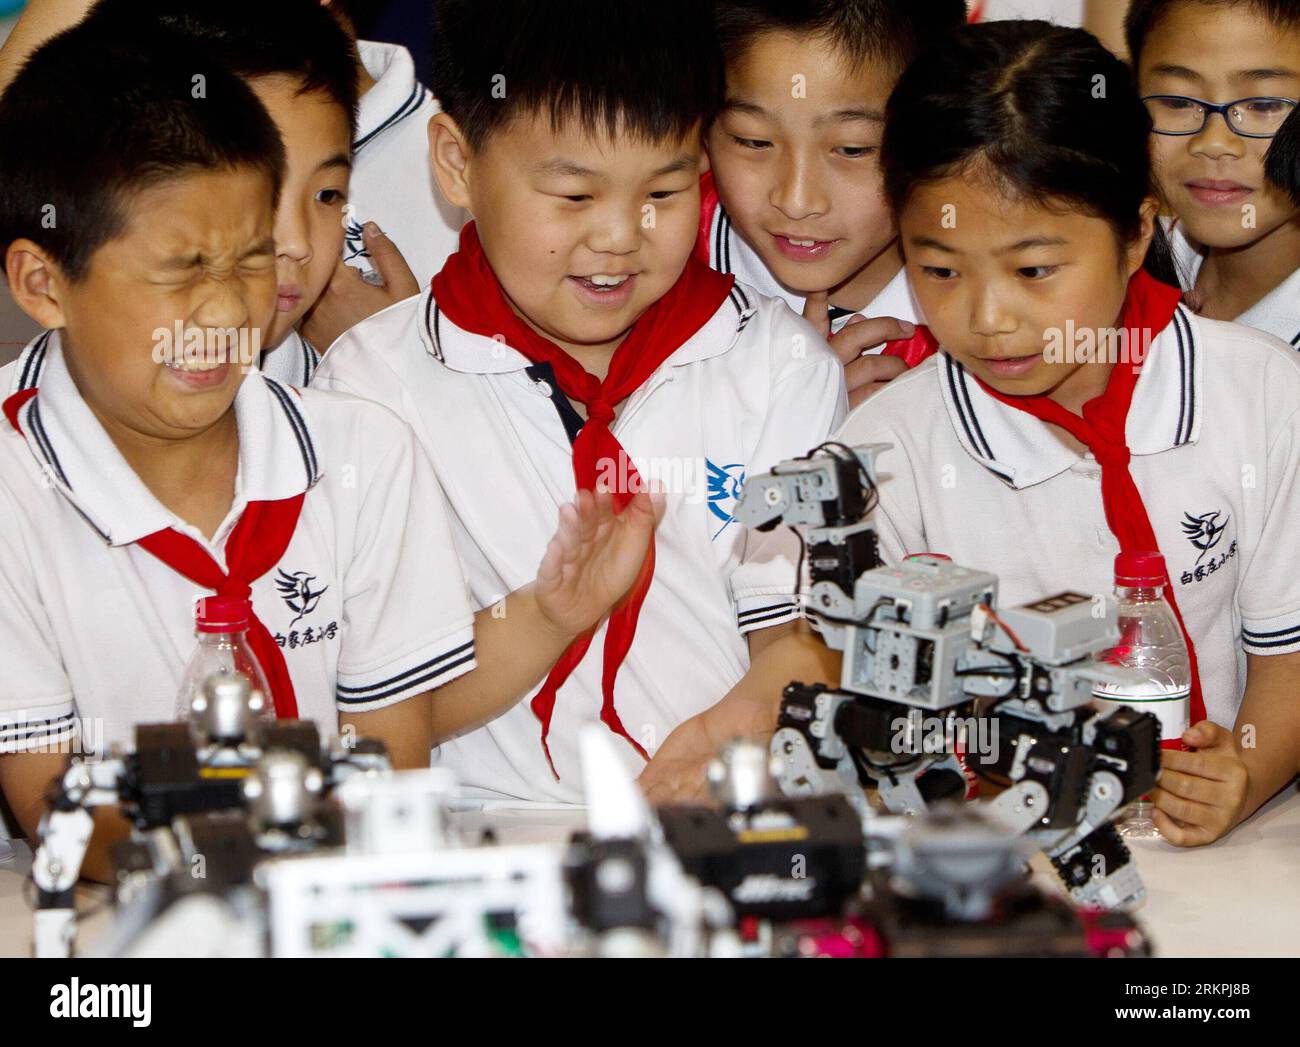 Bildnummer: 58005817  Datum: 19.05.2012  Copyright: imago/Xinhua (120519) -- BEIJING, May 19, 2012 (Xinhua) -- Young students are attracted by a robot dog, which can react to sounds, during the Science and Technology Week activity in Beijing, capital of China, May 19, 2012. A series of activities were held in different cities across the country to launch the Science and Technology Week on Saturday. (Xinhua/Jin Liwang) (ry) CHINA-SCIENCE AND TECHNOLOGY WEEK-ACTIVITIES (CN) PUBLICATIONxNOTxINxCHN Gesellschaft Bildung Schule Grundschule Fotostory xda x1x 2012 quer  o0 Uboot, unterseeboot  U boot Stock Photo